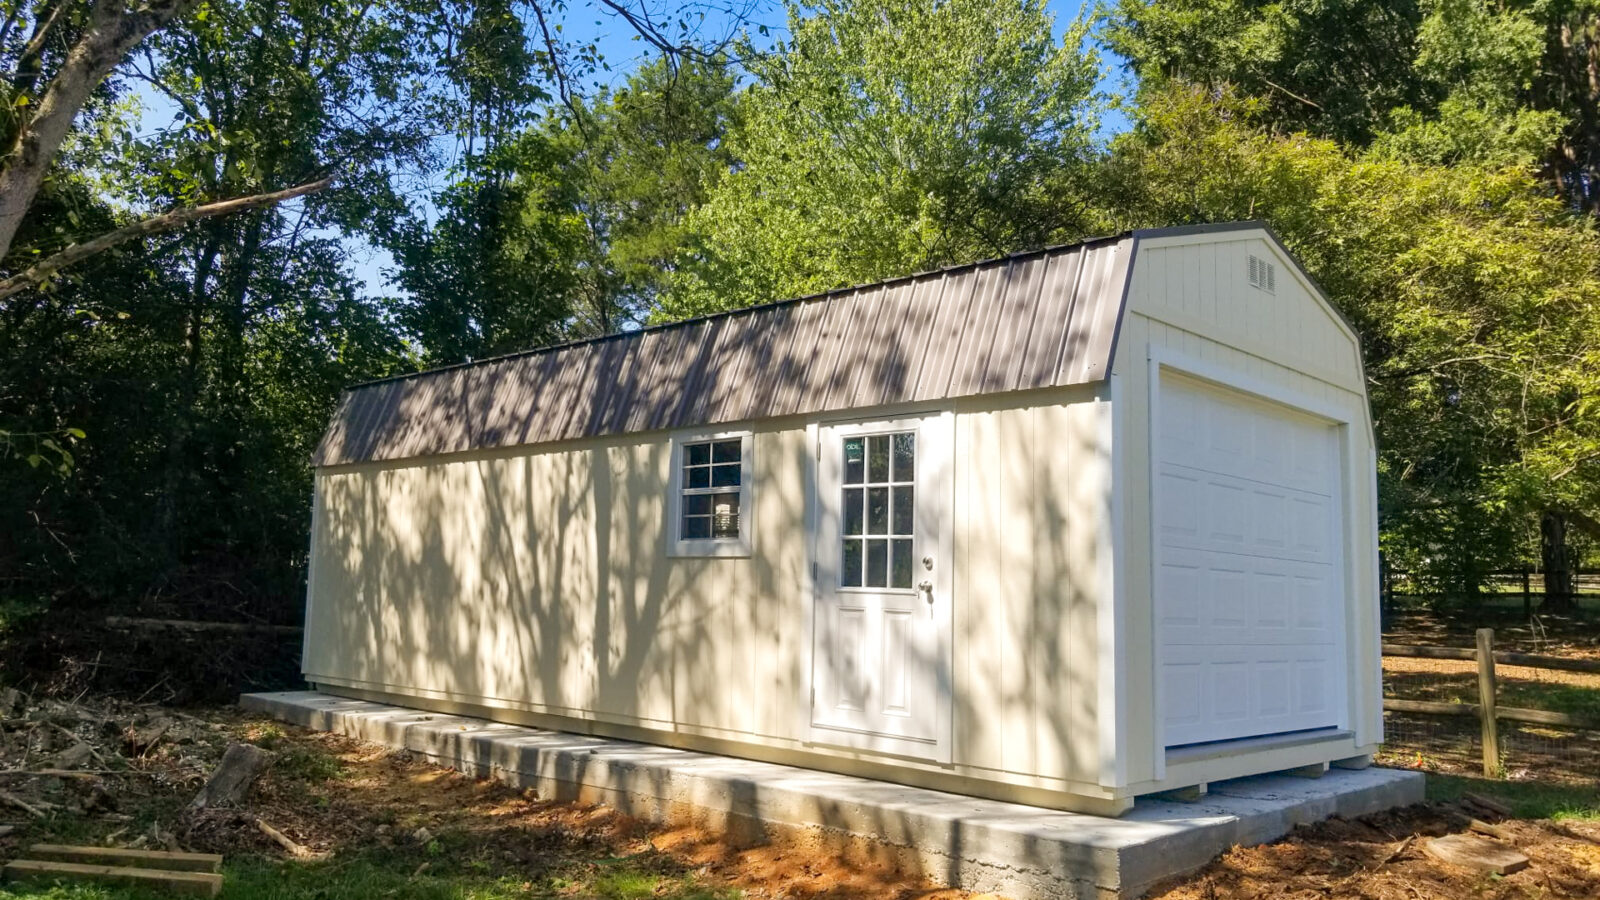 yellow and brown garage that may need to fulfill shed requirements in SC